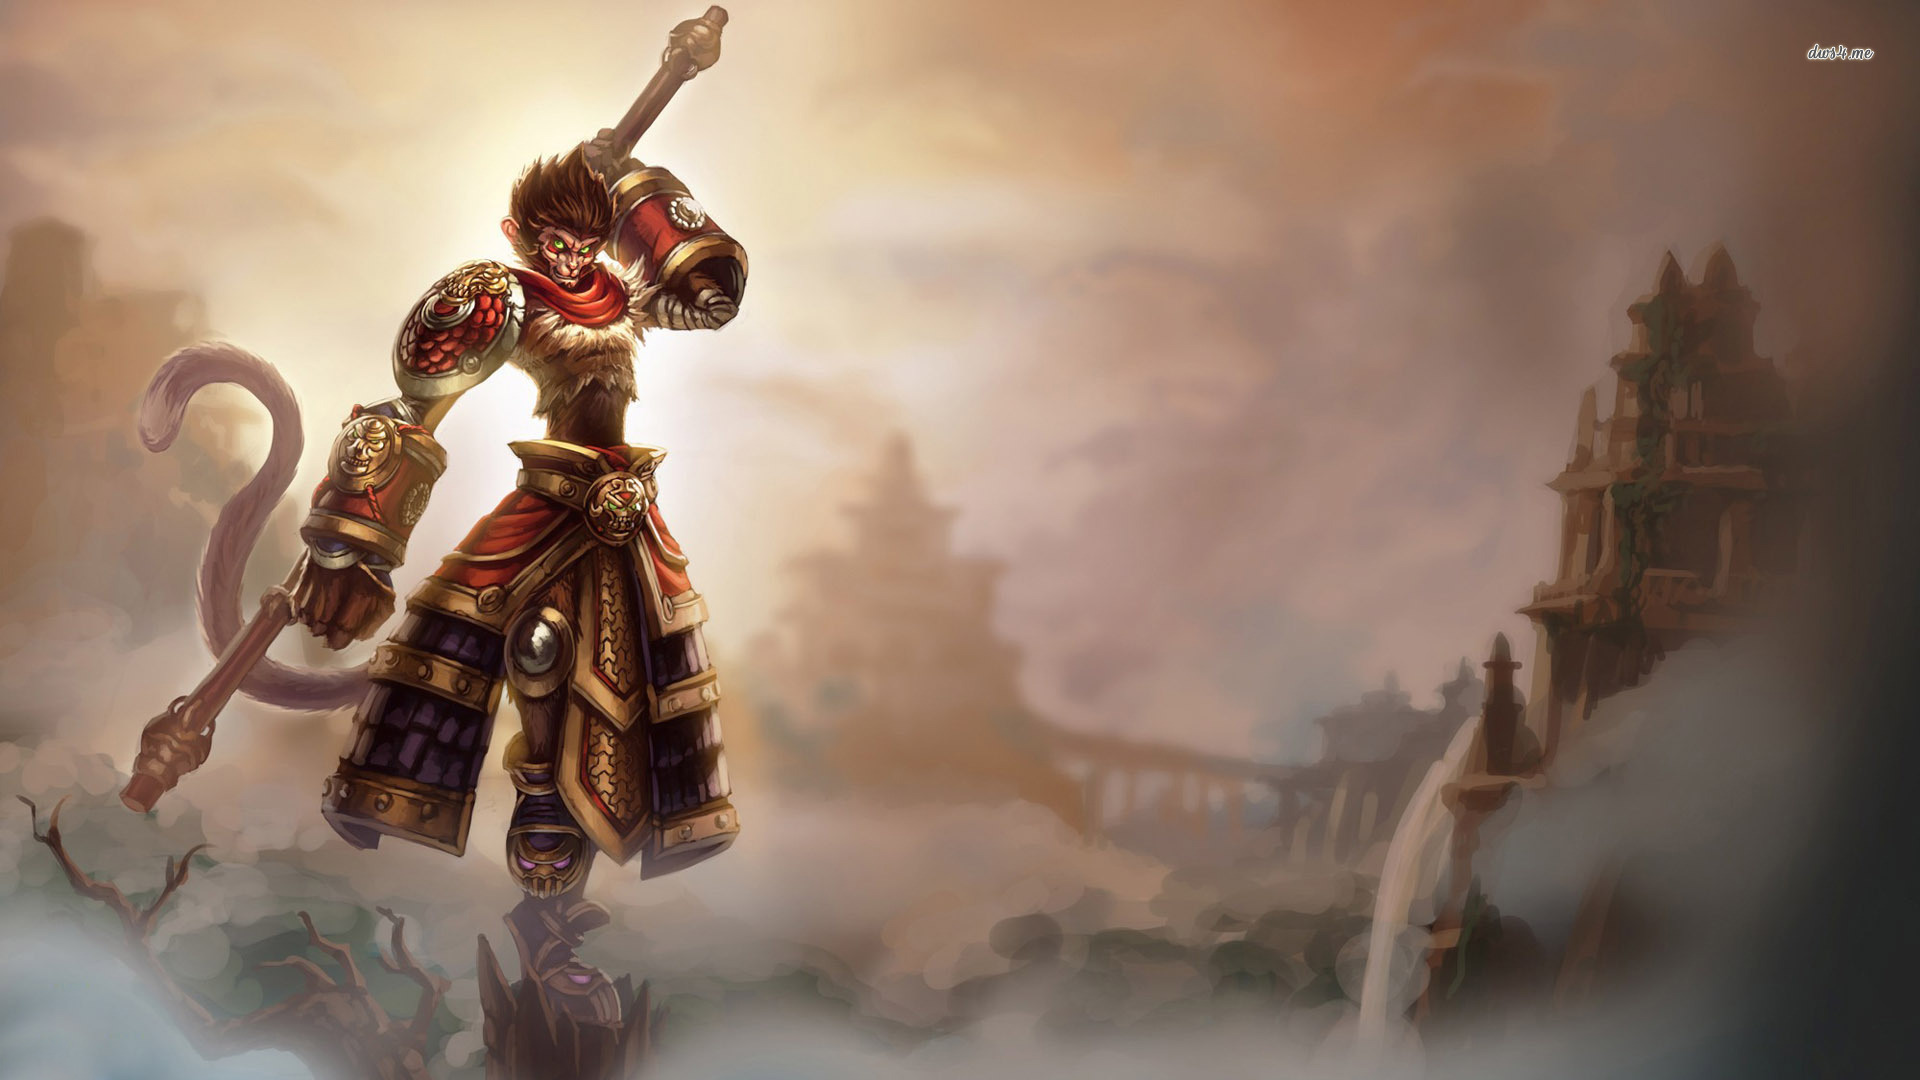 Free Download Wukong The Monkey King League Of Legends Wallpaper 1280x800 Wukong 19x1080 For Your Desktop Mobile Tablet Explore 47 Lol Wukong Wallpaper Lol Wukong Wallpaper Wukong Wallpaper Lol Wallpapers